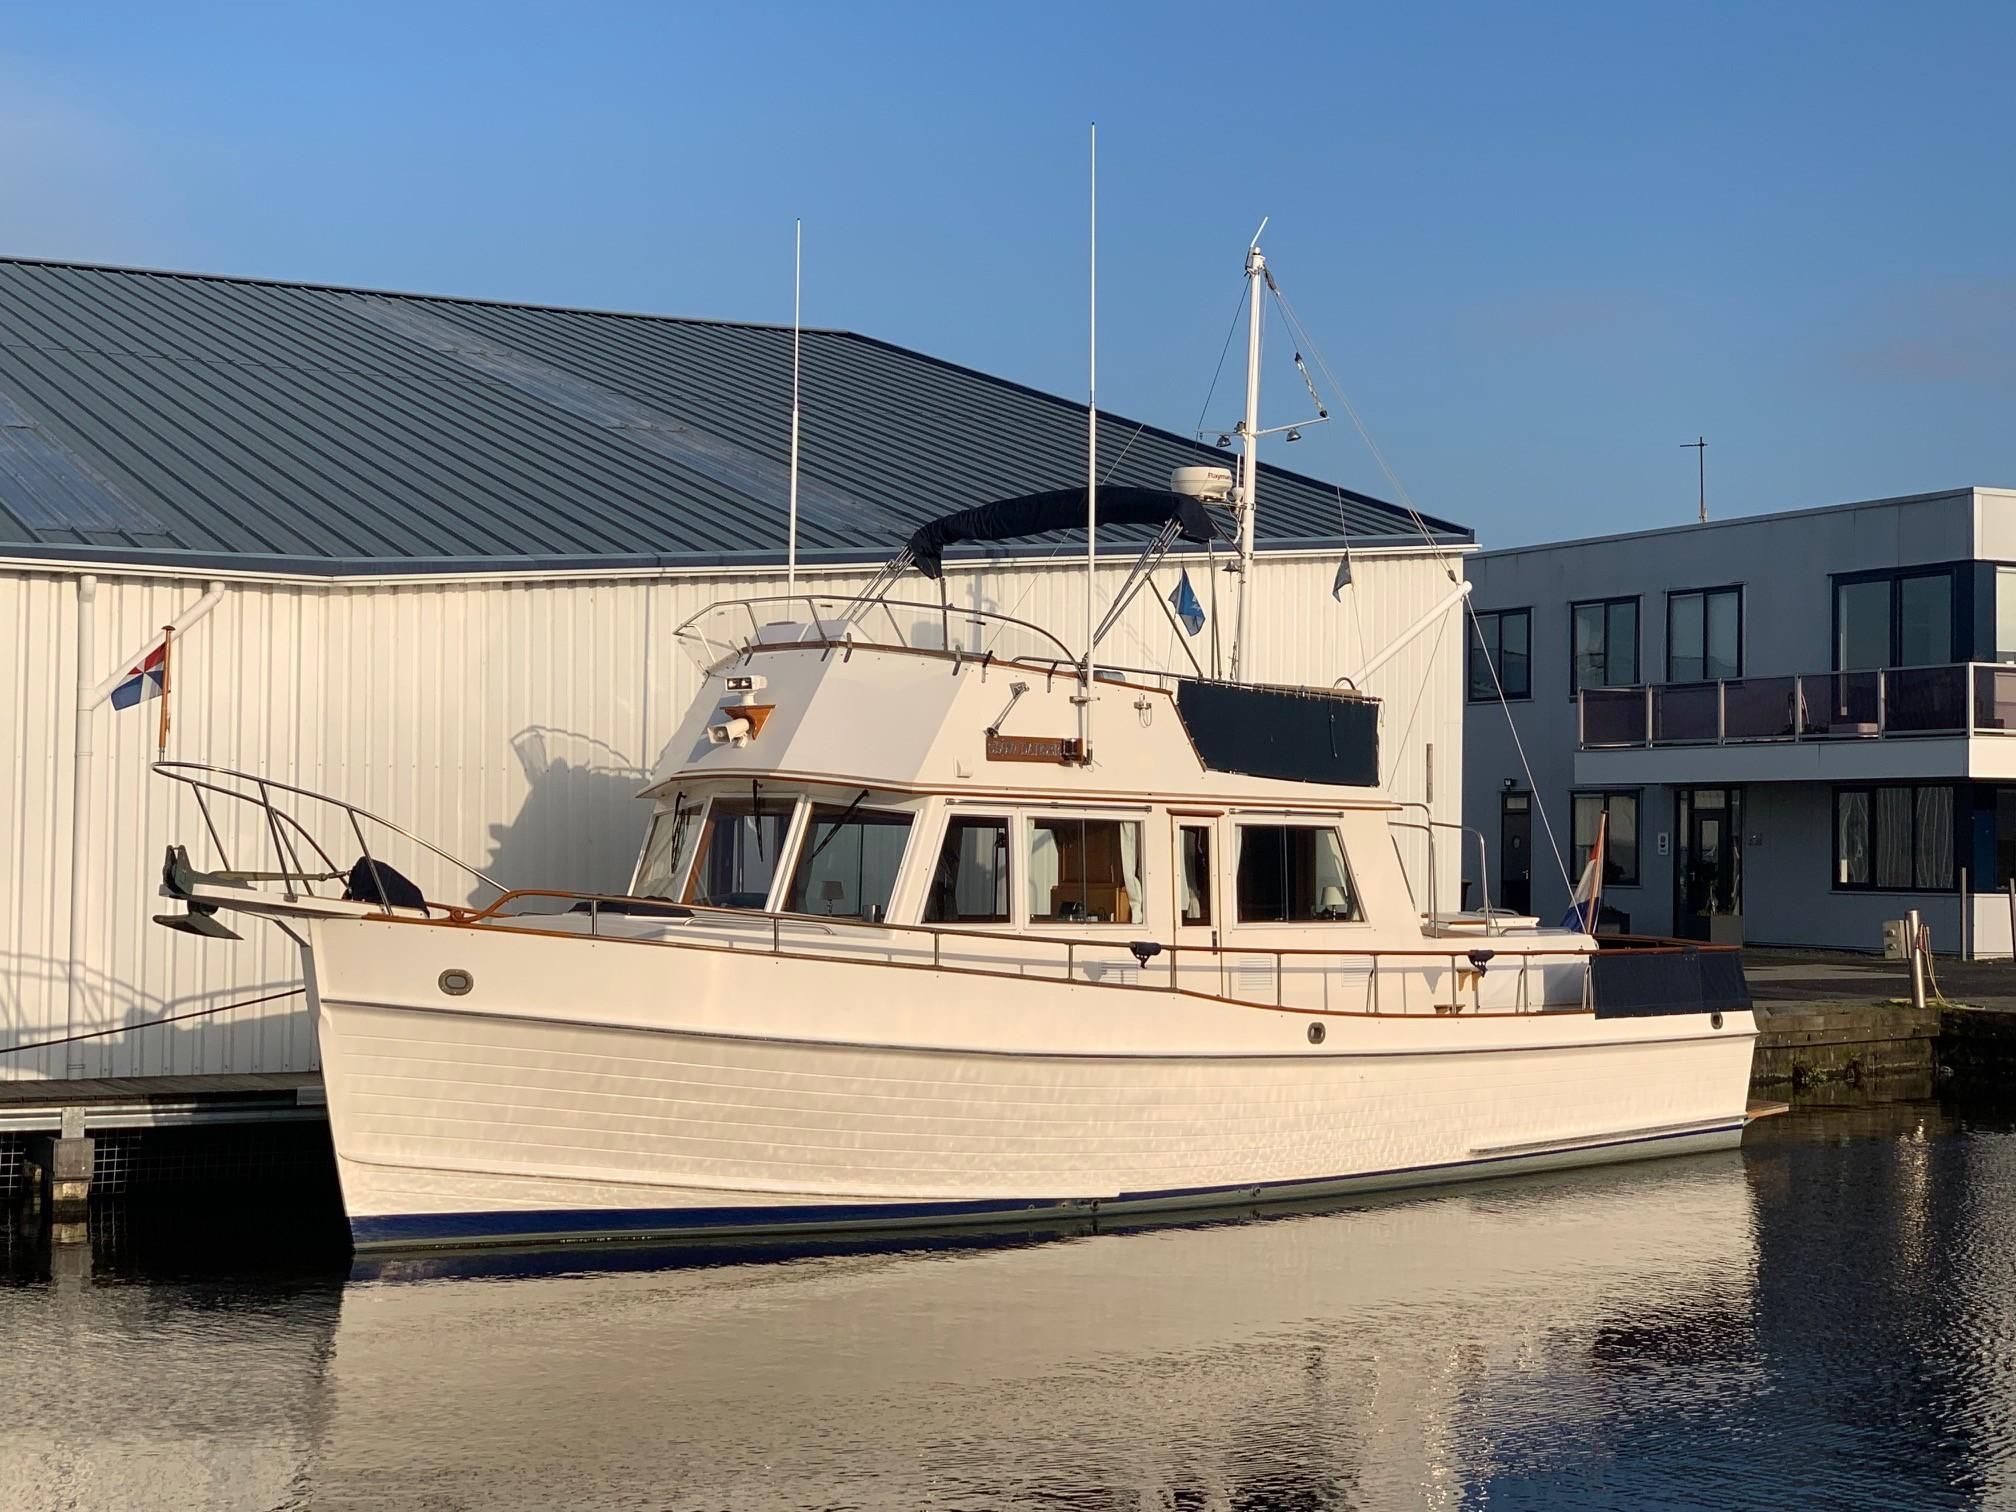 42 grand banks motor yacht for sale